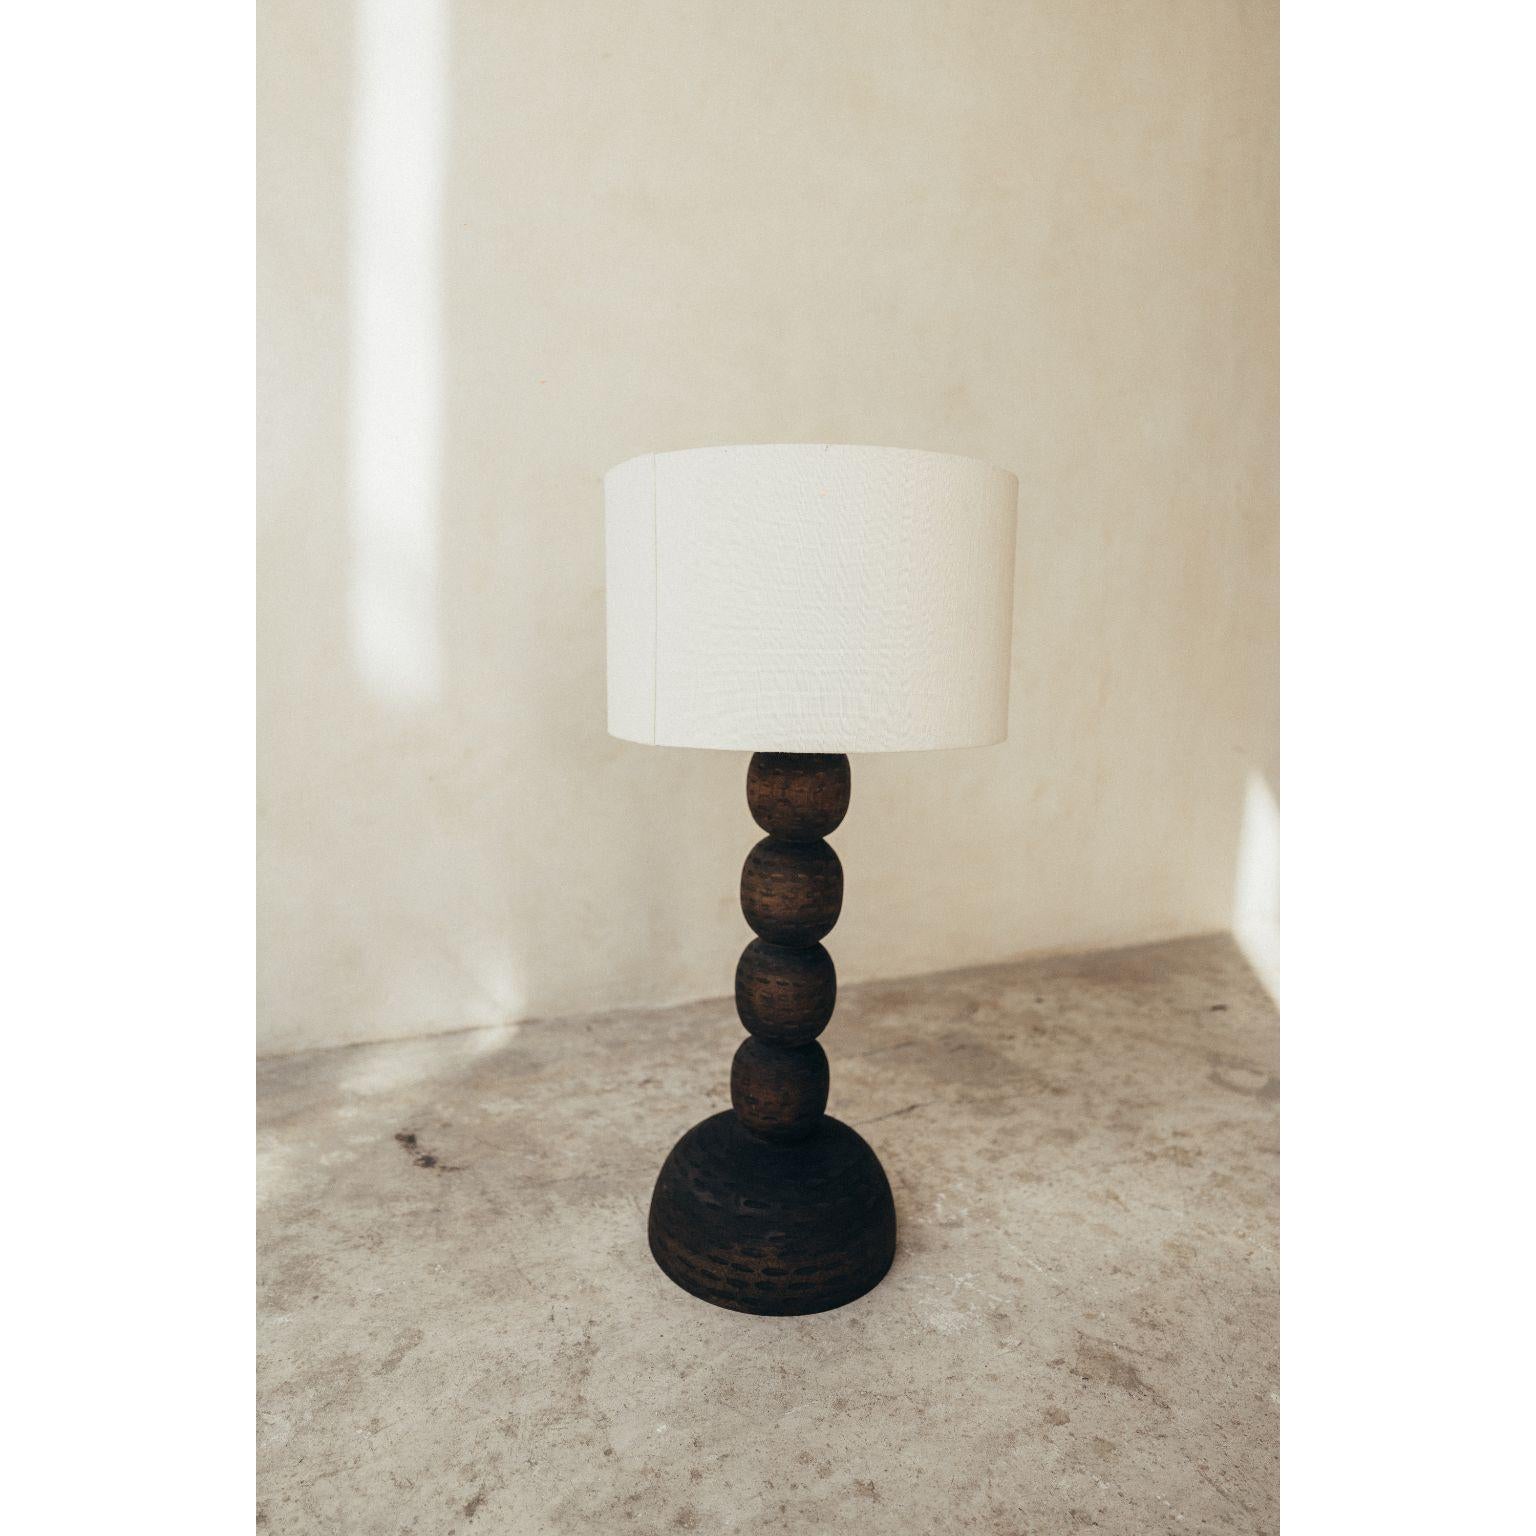 Wooden desk lamp vintage with linen shade by Daniel Orozco.
Dimensions: D 30 x H 45 cm.
Materials: wood, linen.

All our lamps can be wired according to each country. If sold to the USA it will be wired for the USA for instance.

Daniel Orozco